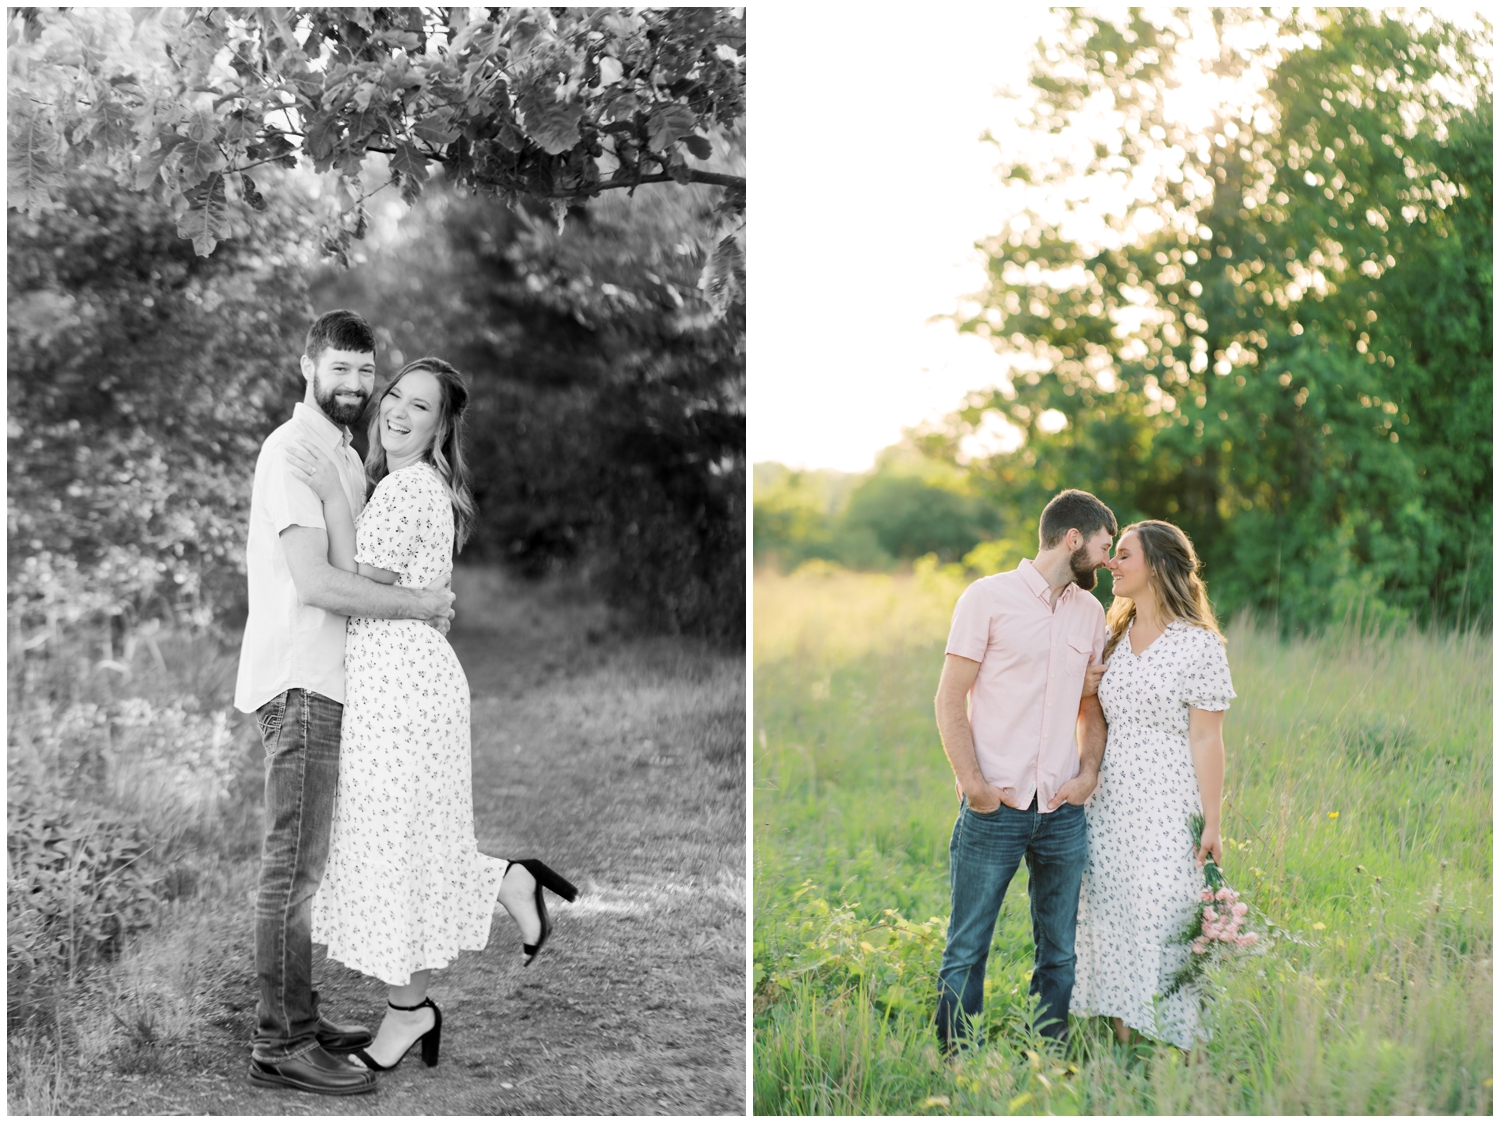 Engagement Photographer in South Bend Indiana | Engagement Shoot at Cobus Creek County Park